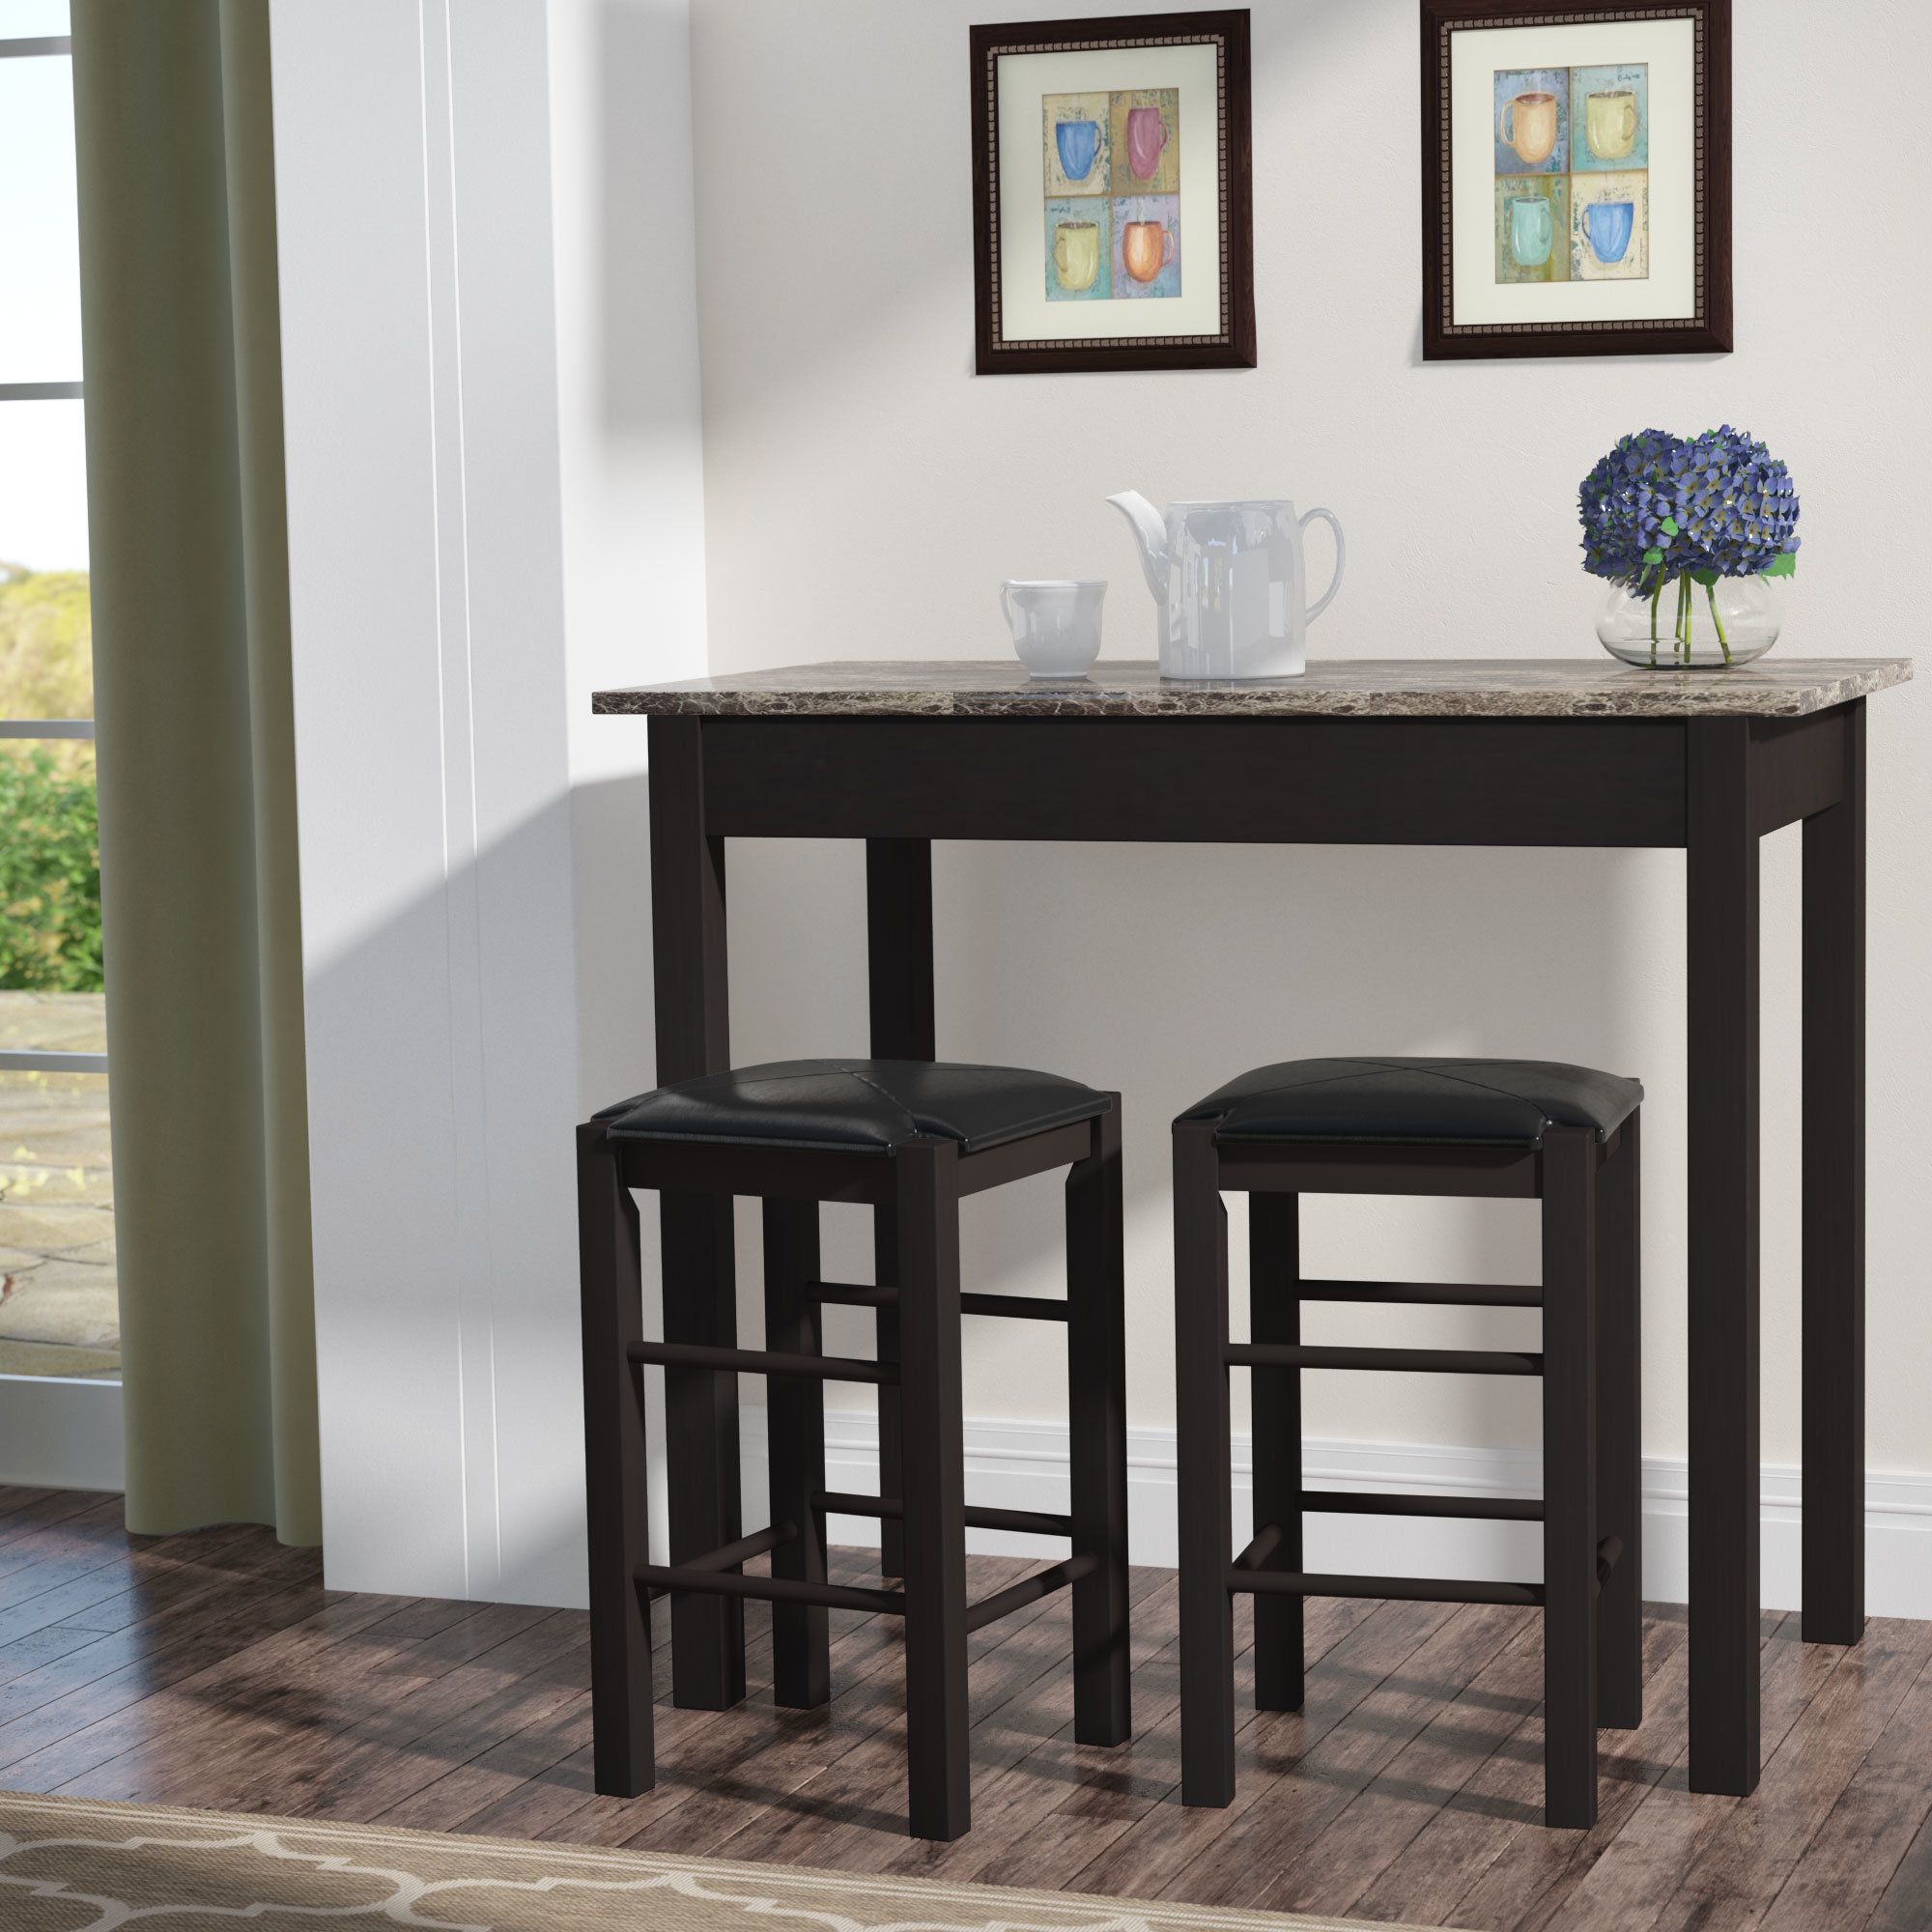 Tappahannock 3 Piece Counter Height Dining Sets Intended For Latest Winston Porter Sheetz 3 Piece Counter Height Dining Set & Reviews (View 2 of 25)